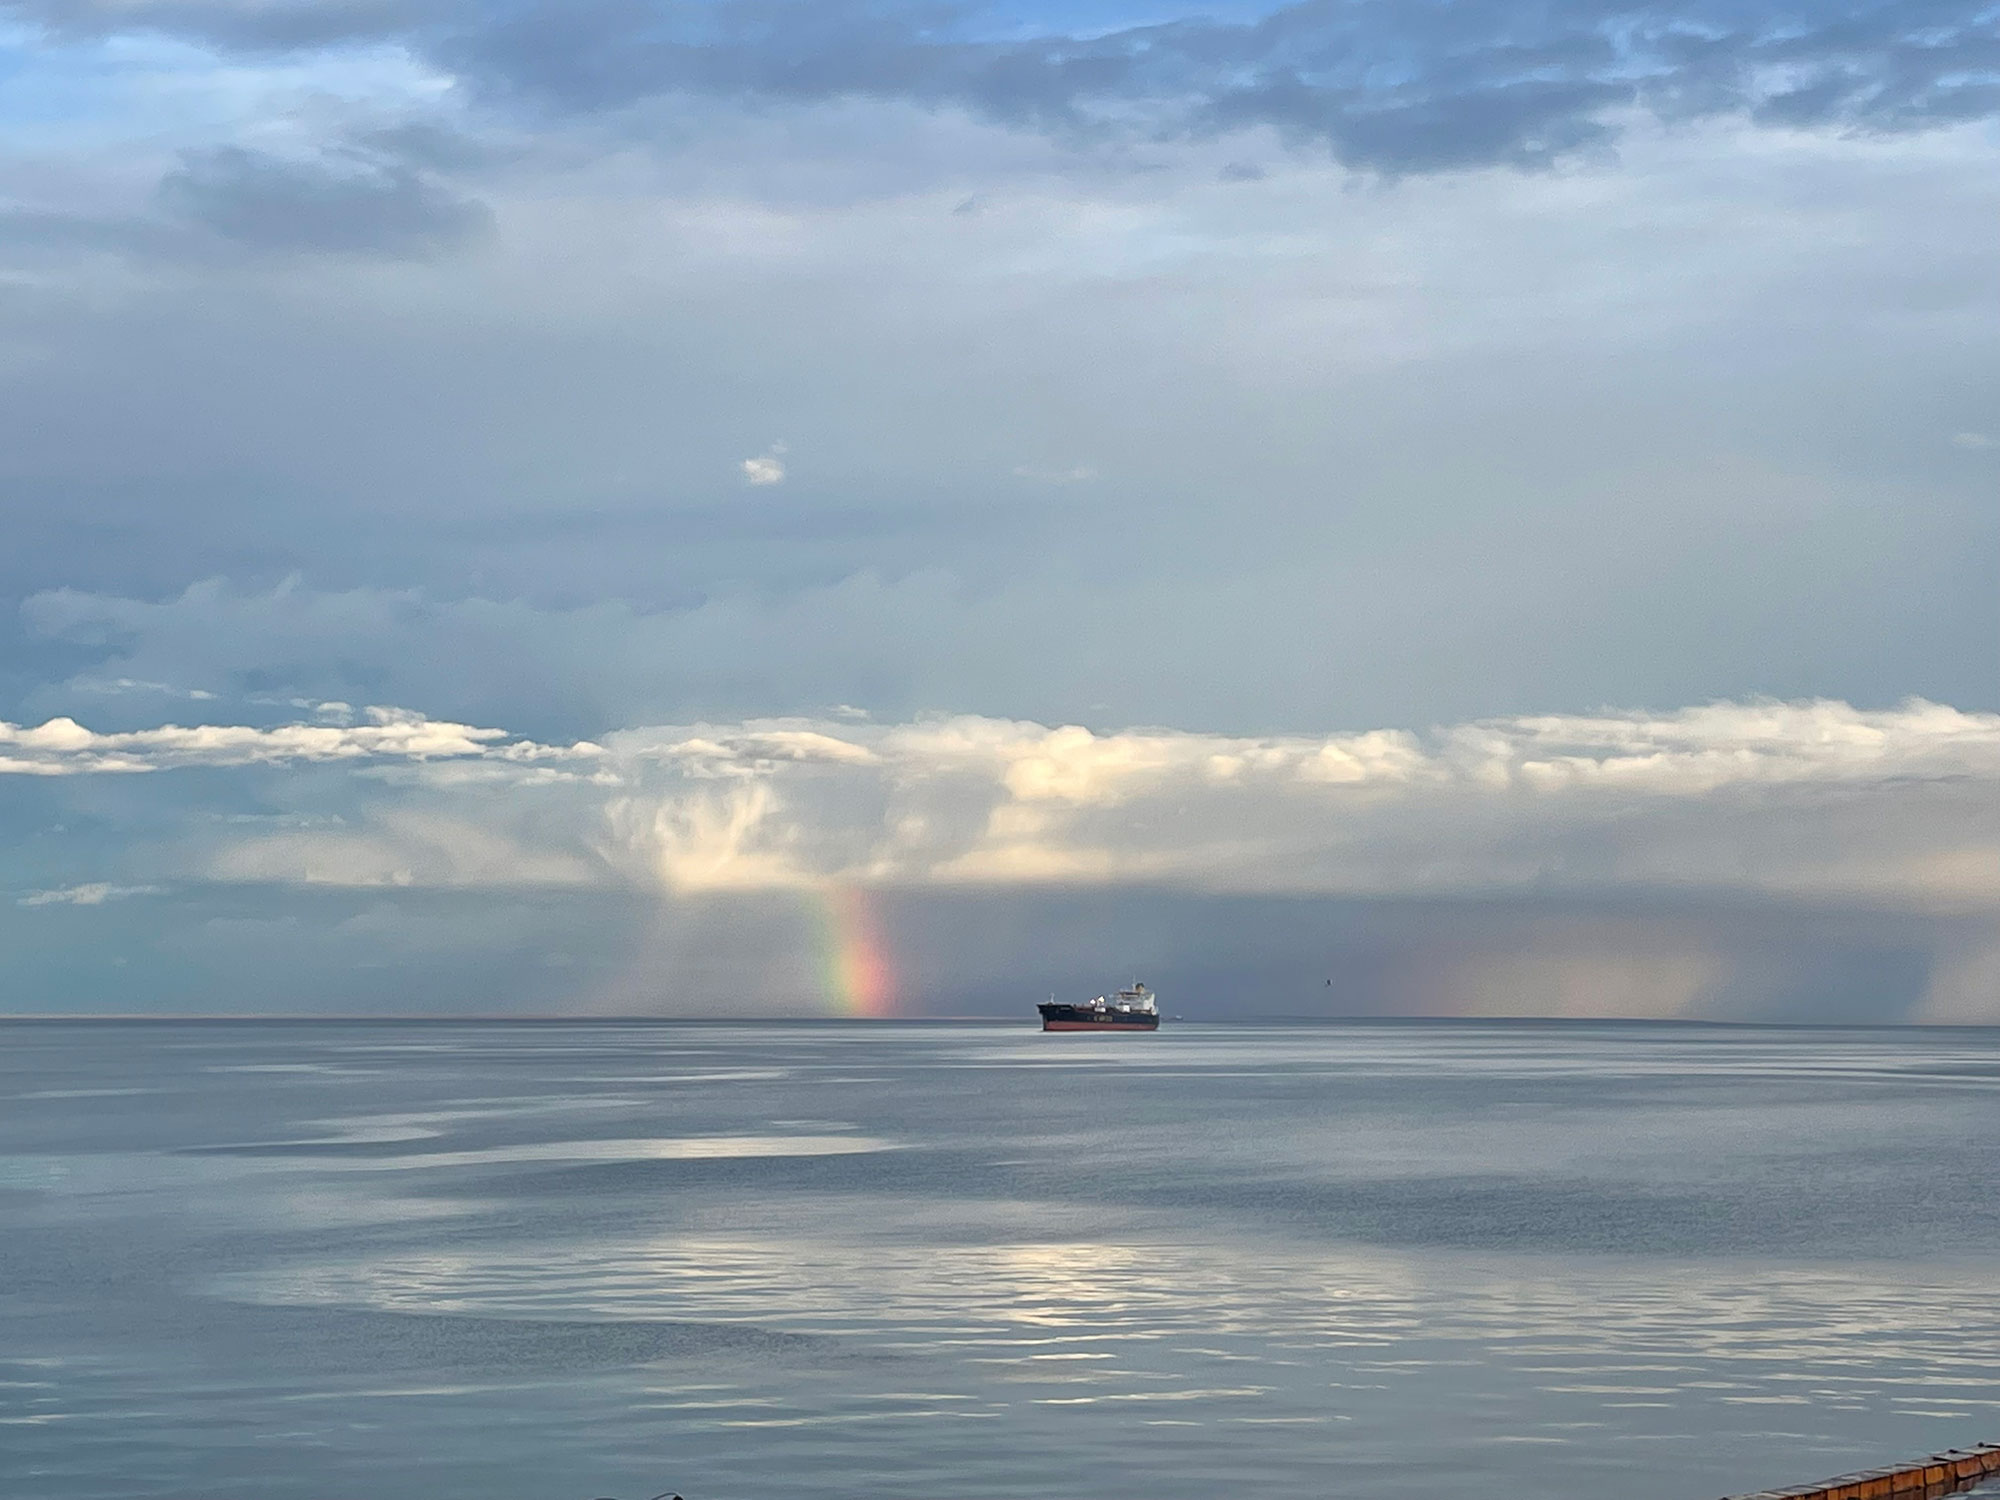 Another ship far away across a calm, clear sea, white clouds higher in the sky, a rainbow and streaks of rain lower on the horizon. 